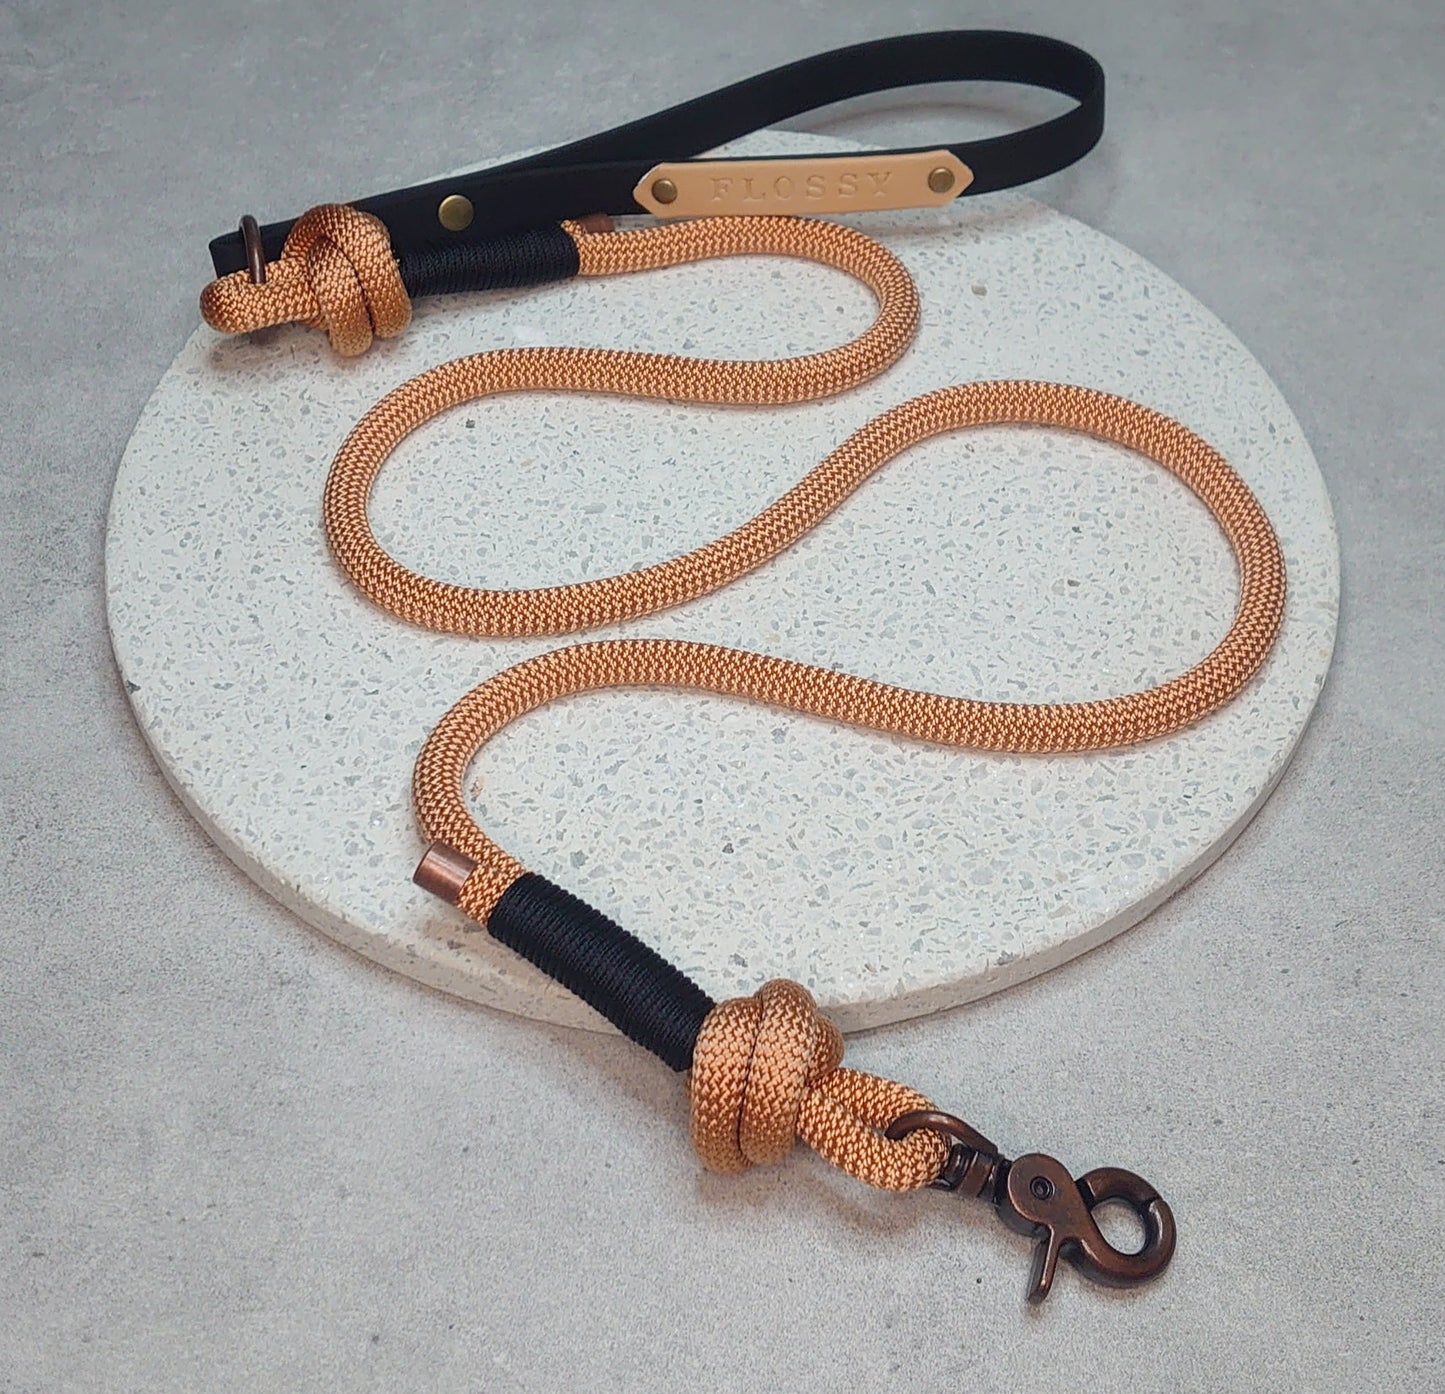 Cross knot rope lead with biothane handle - Design your own